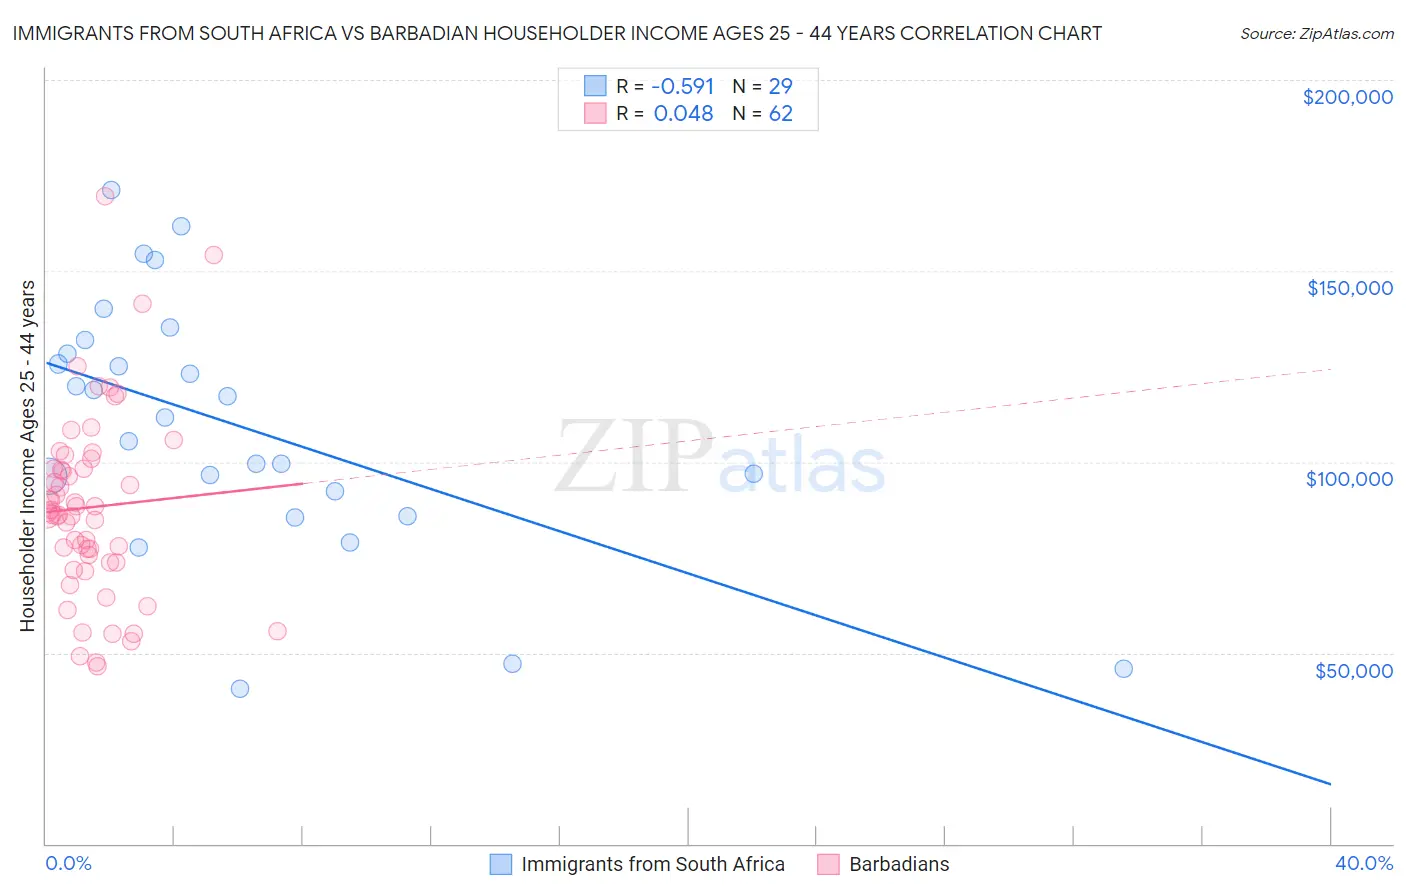 Immigrants from South Africa vs Barbadian Householder Income Ages 25 - 44 years